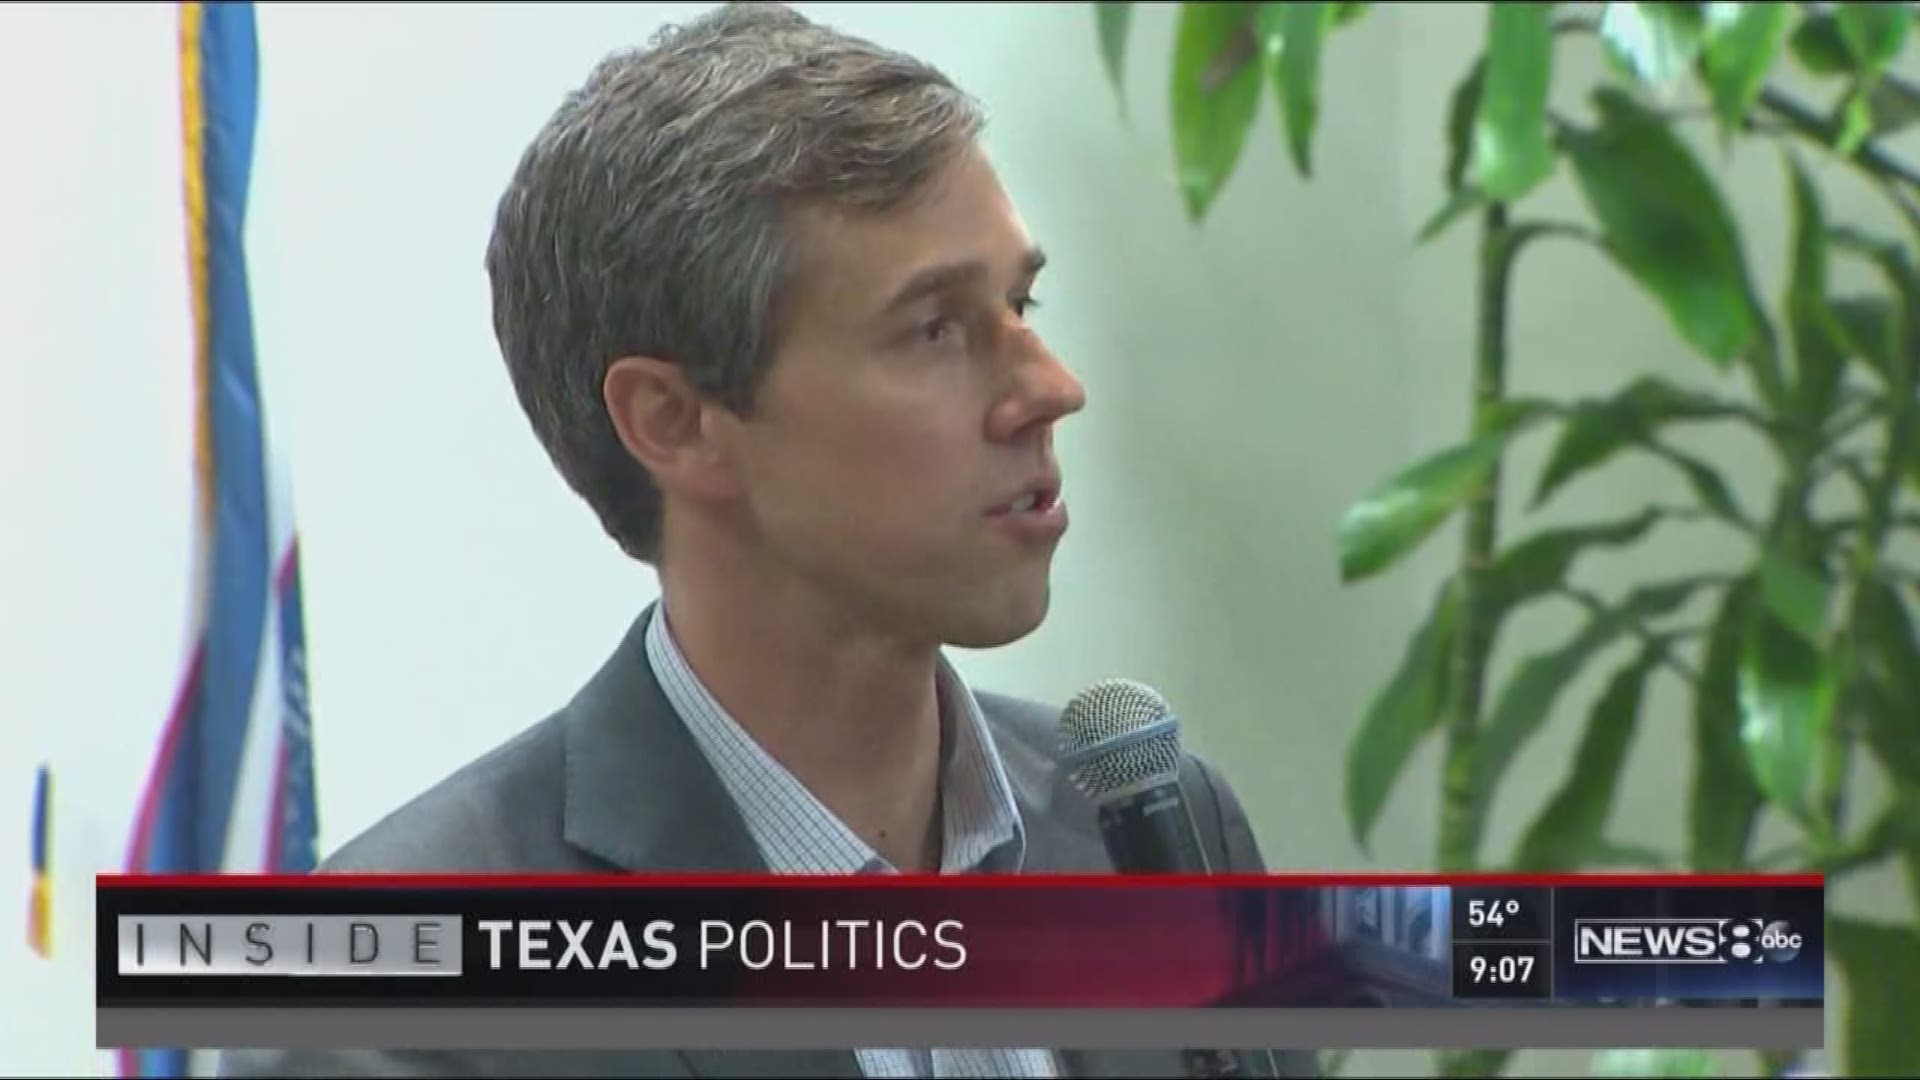 Democrats are no doubt encouraged with U.S. Representative Beto O'Rourke (D-El Paso) - O'Rourke is challenging U.S. Senator Ted Cruz. For the second consecutive quarter, Rep. O'Rourke has raised more money than Sen. Cruz. It is a story that Ross Ramsey, t